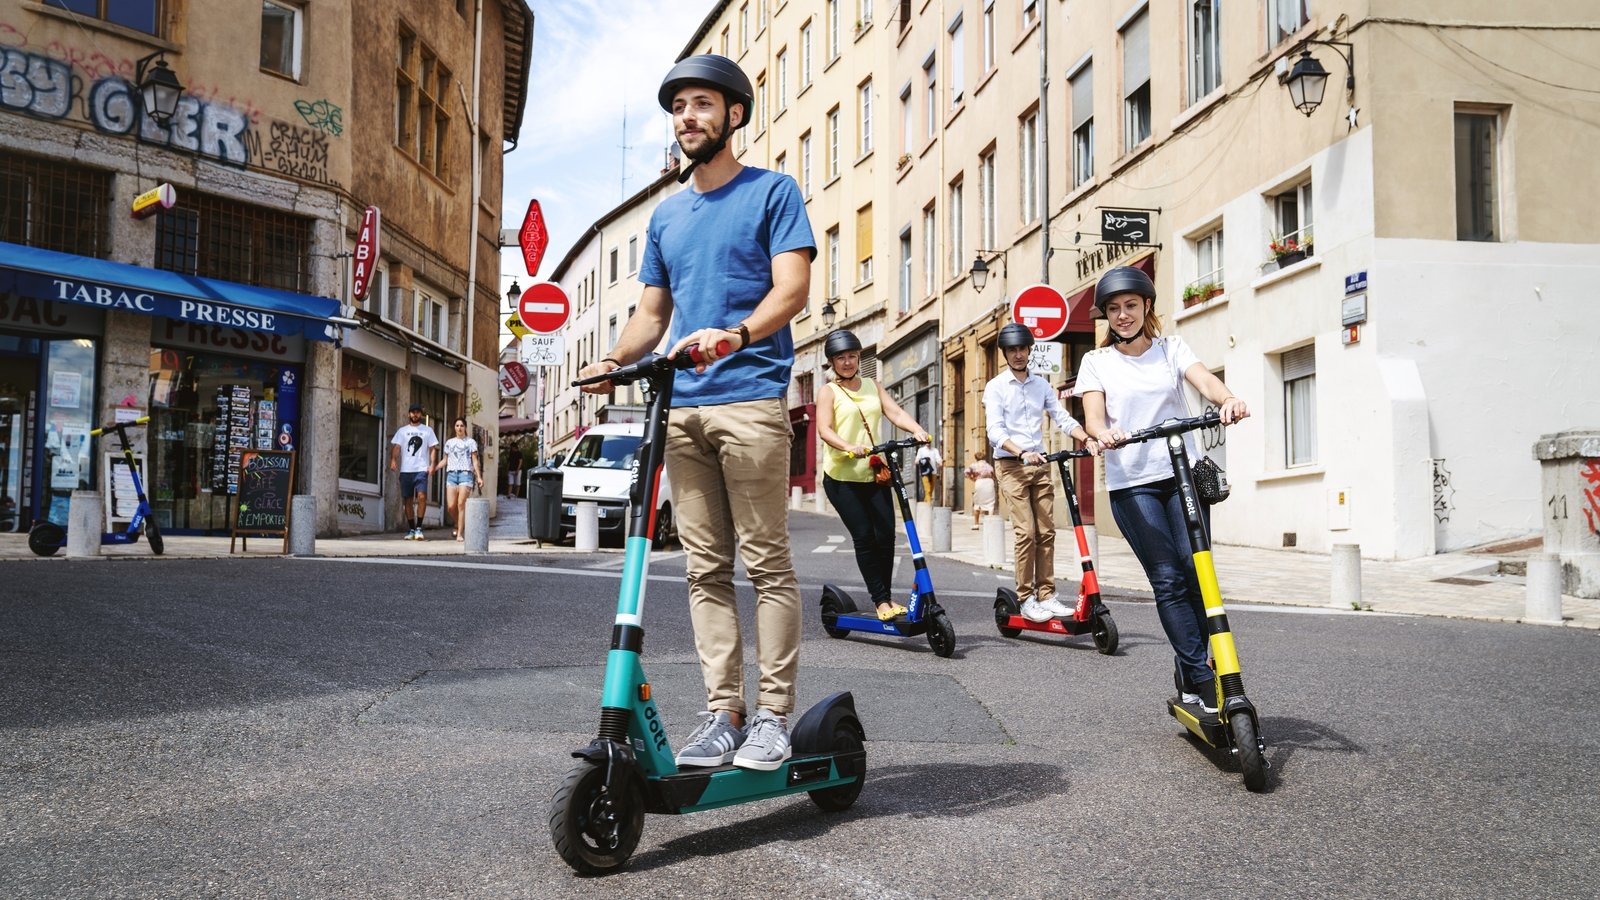 Dot wants to launch e-scooter in Ireland

